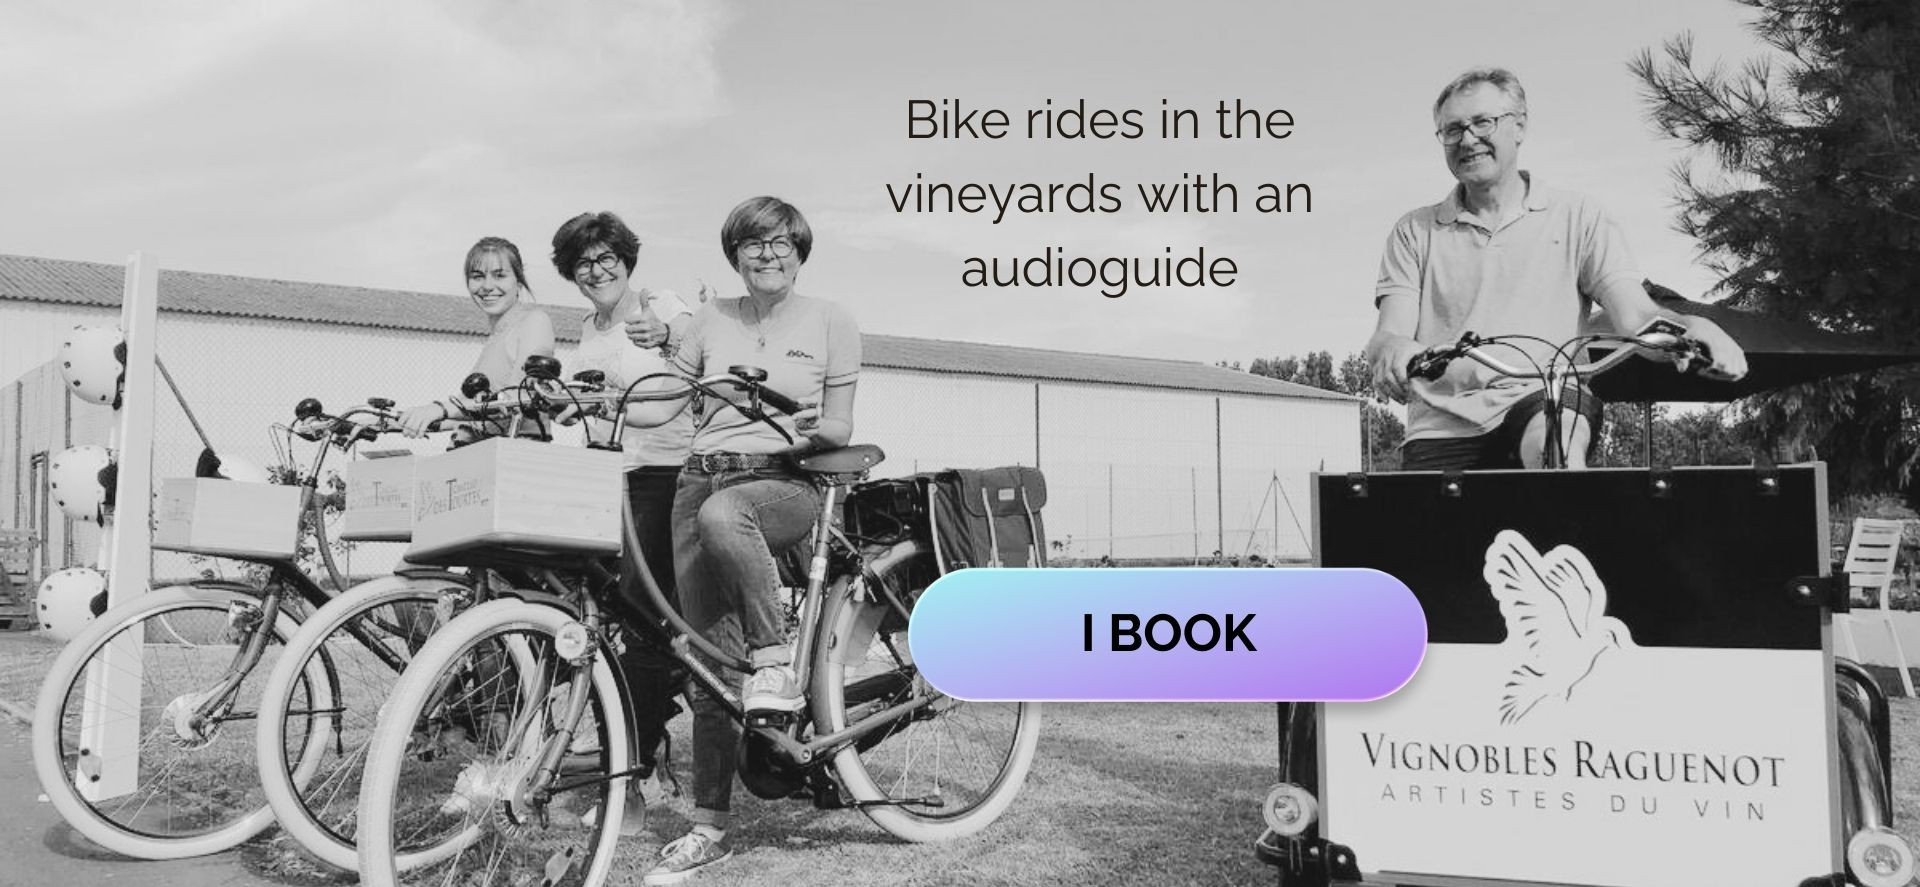 Bike rides in the vineyards with an audioguide